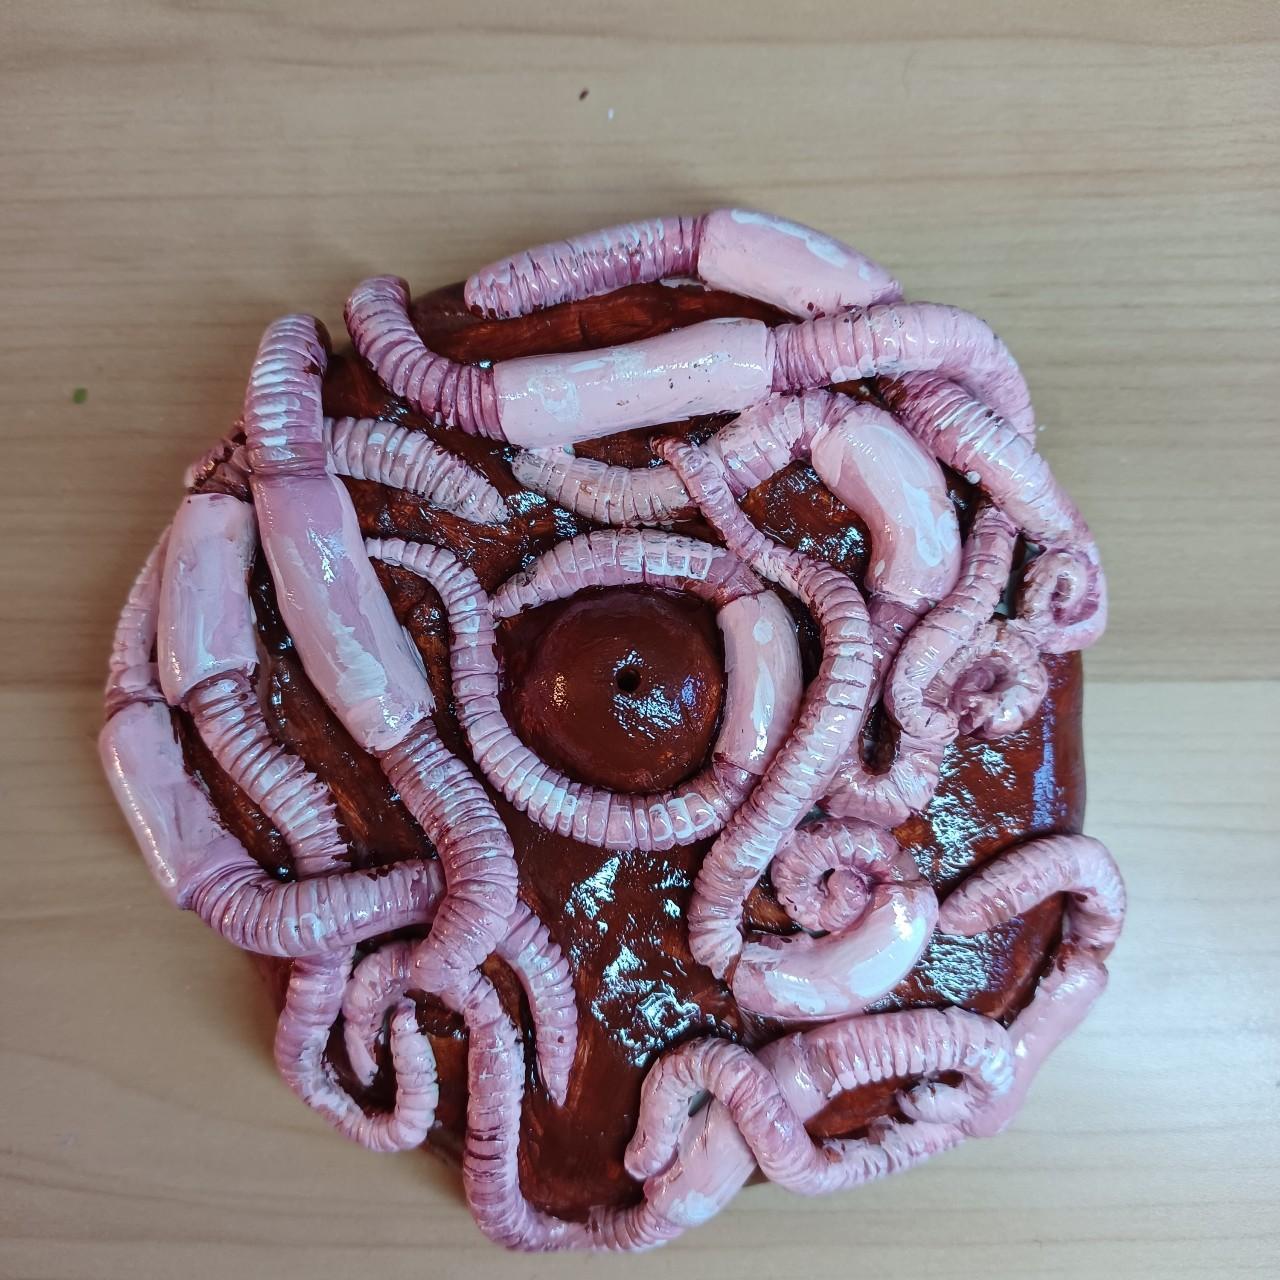 FAKE WORM INCENSE HOLDER . made out of polymer clay - Depop